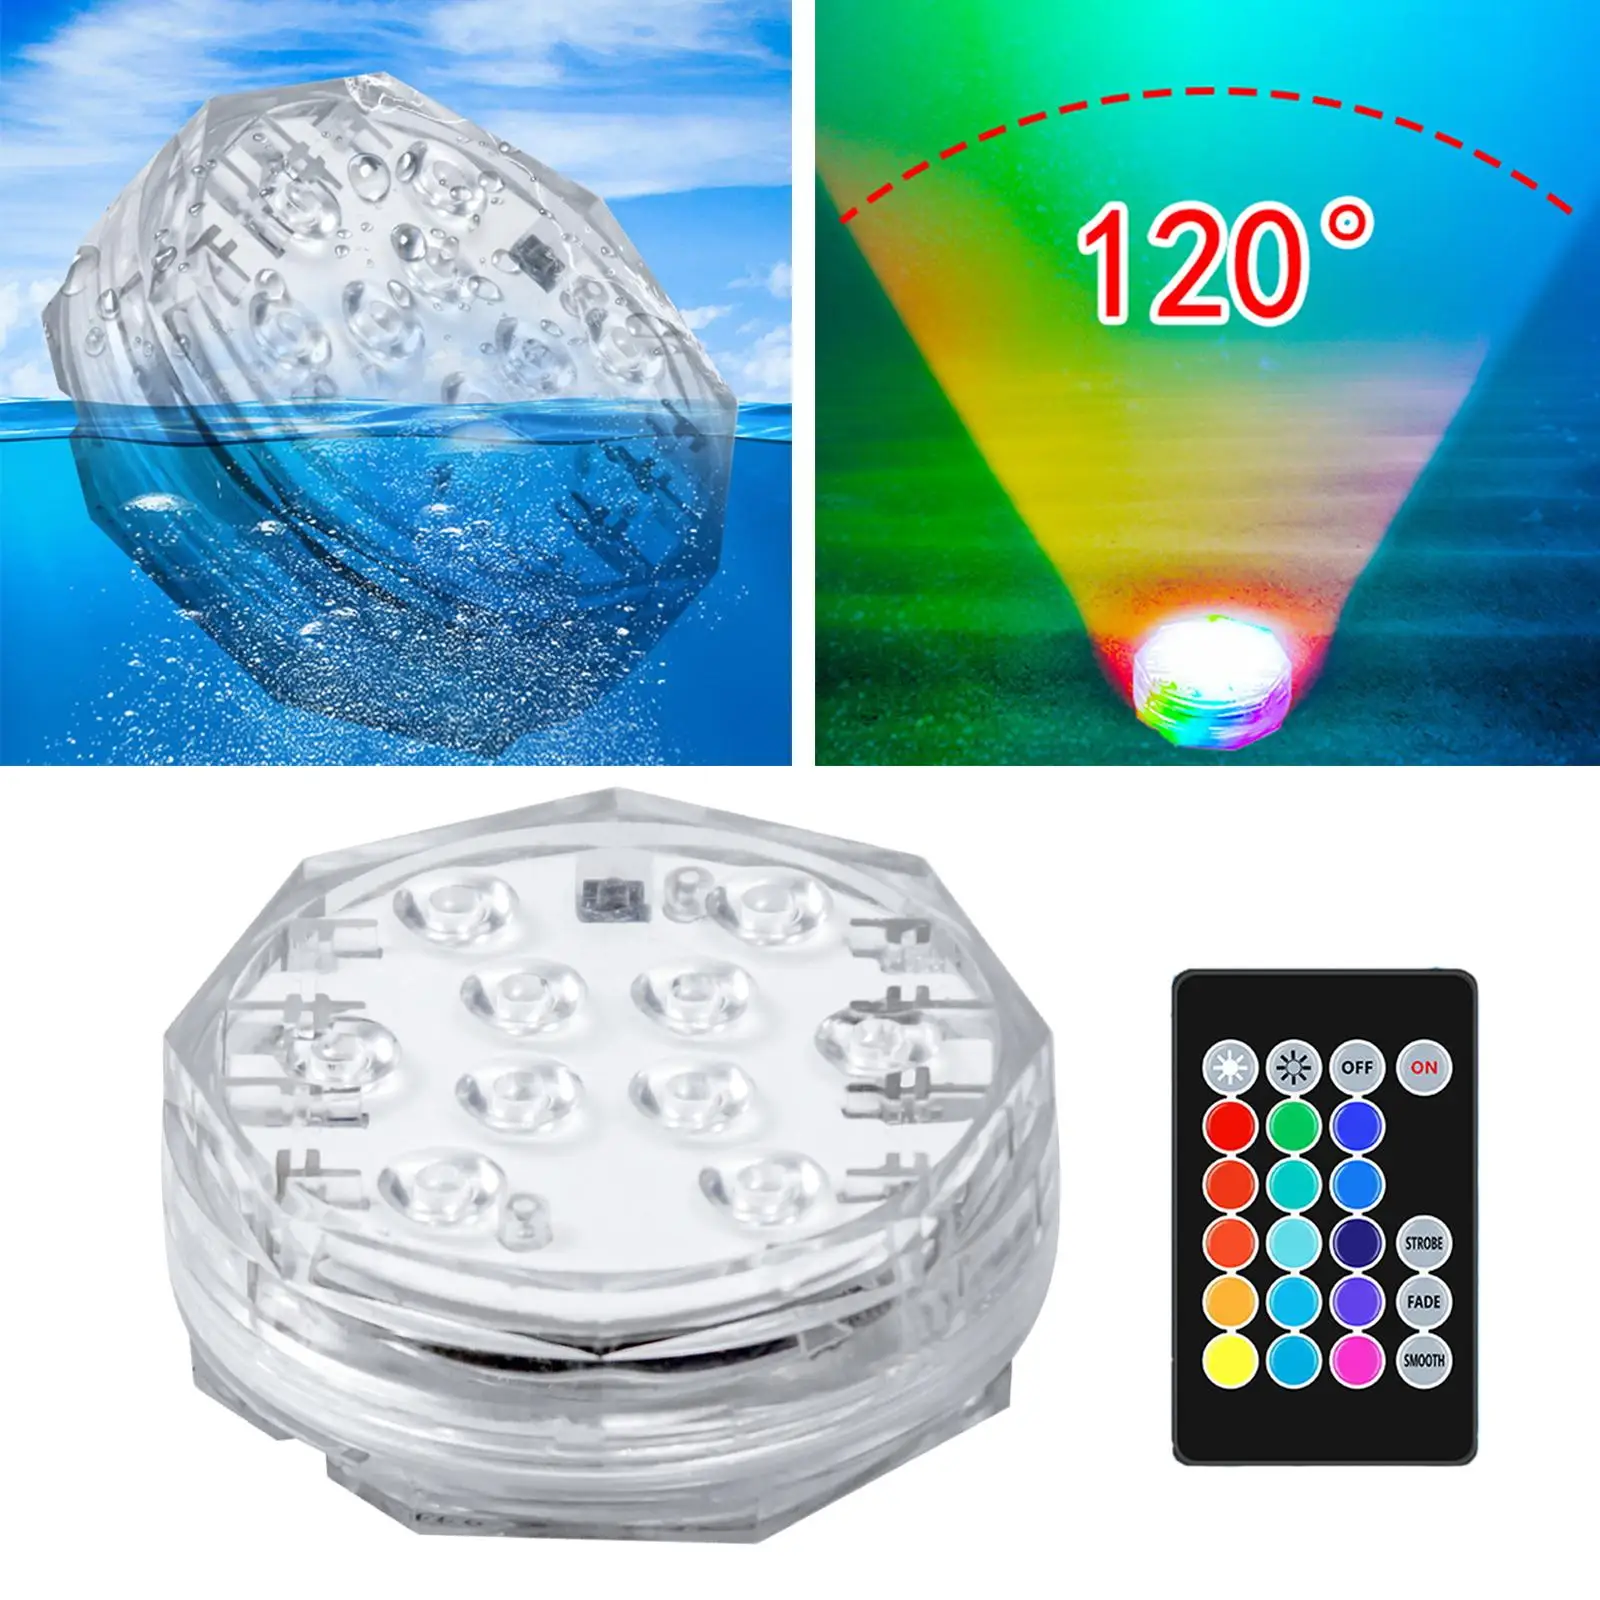 IP68 Waterproof Submersible LED Light Battery Operated Underwater Lamp for Decoration